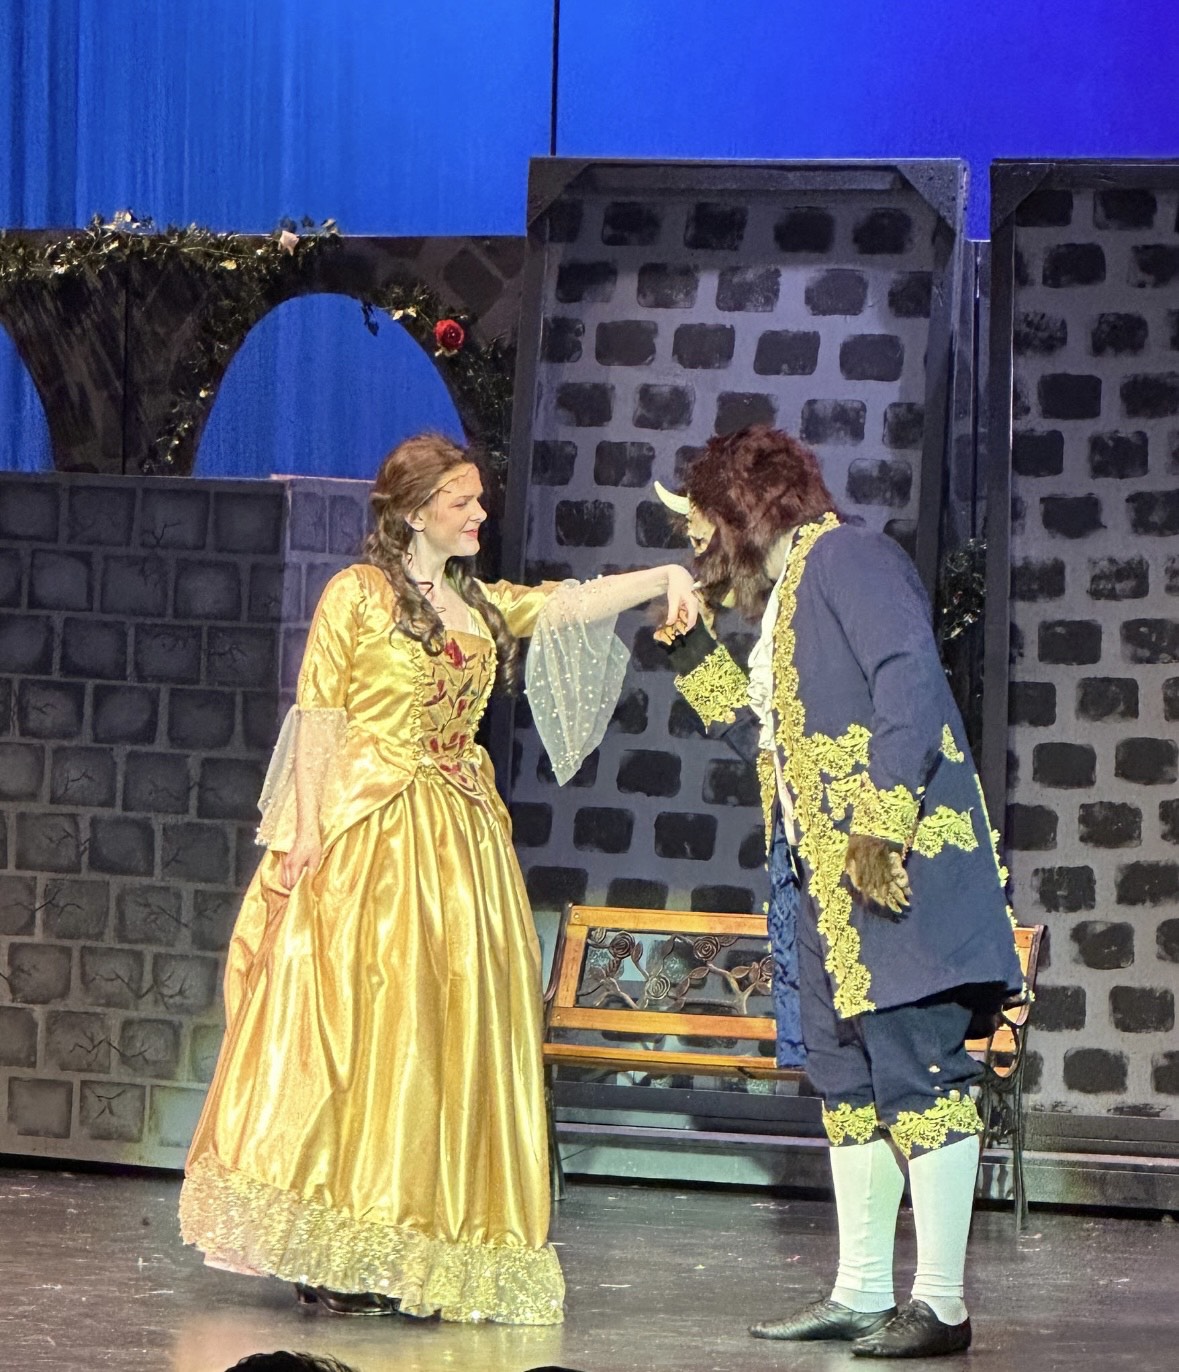 Beauty and the Beast play